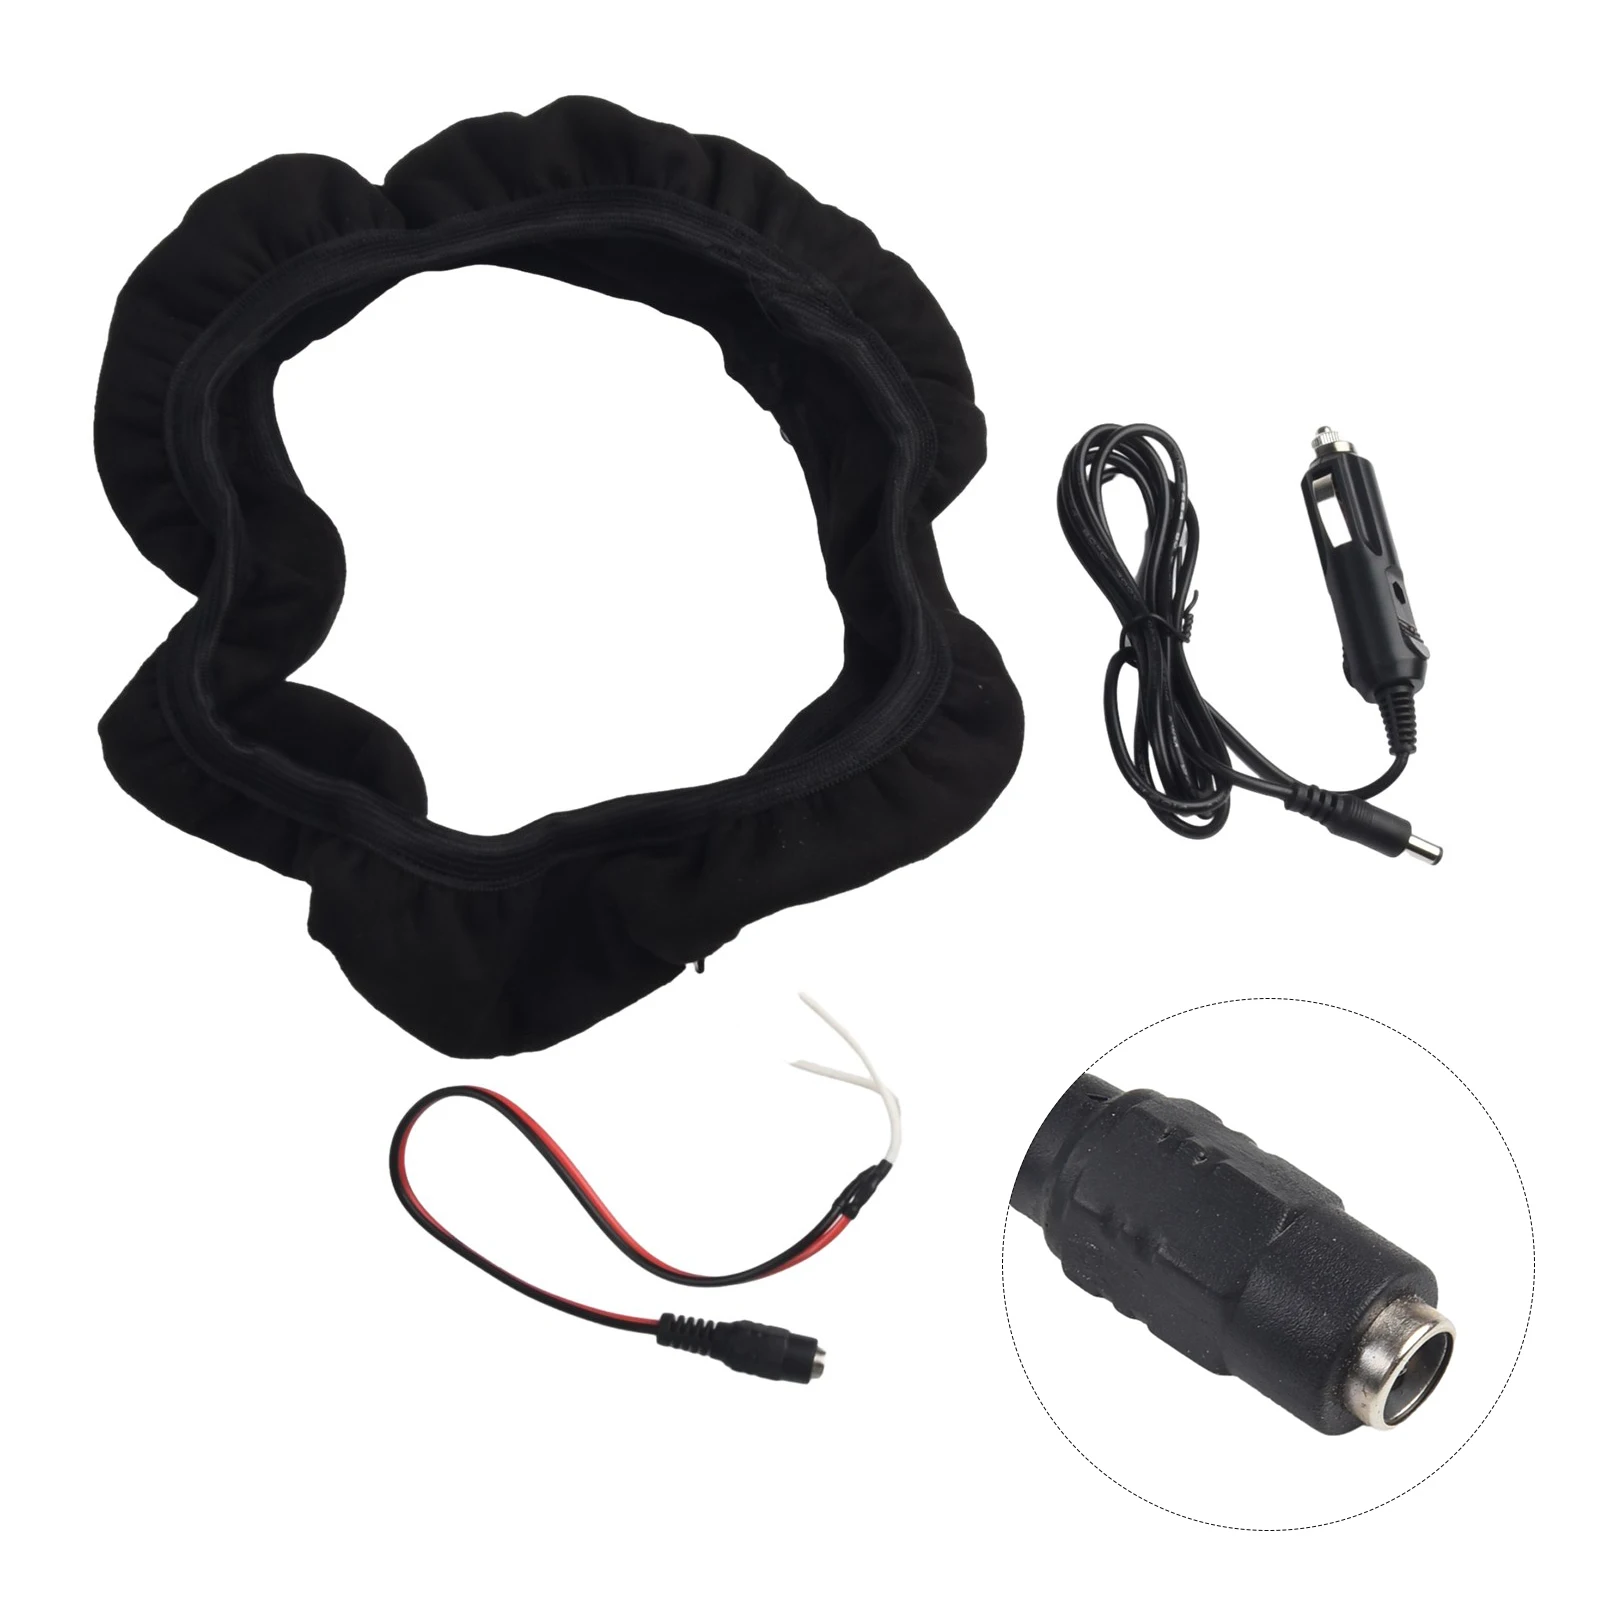 

Cap Steering Wheel Cover Accessories High Quality Hot Sale Replacement Useful Brand New Durable Practical Universal